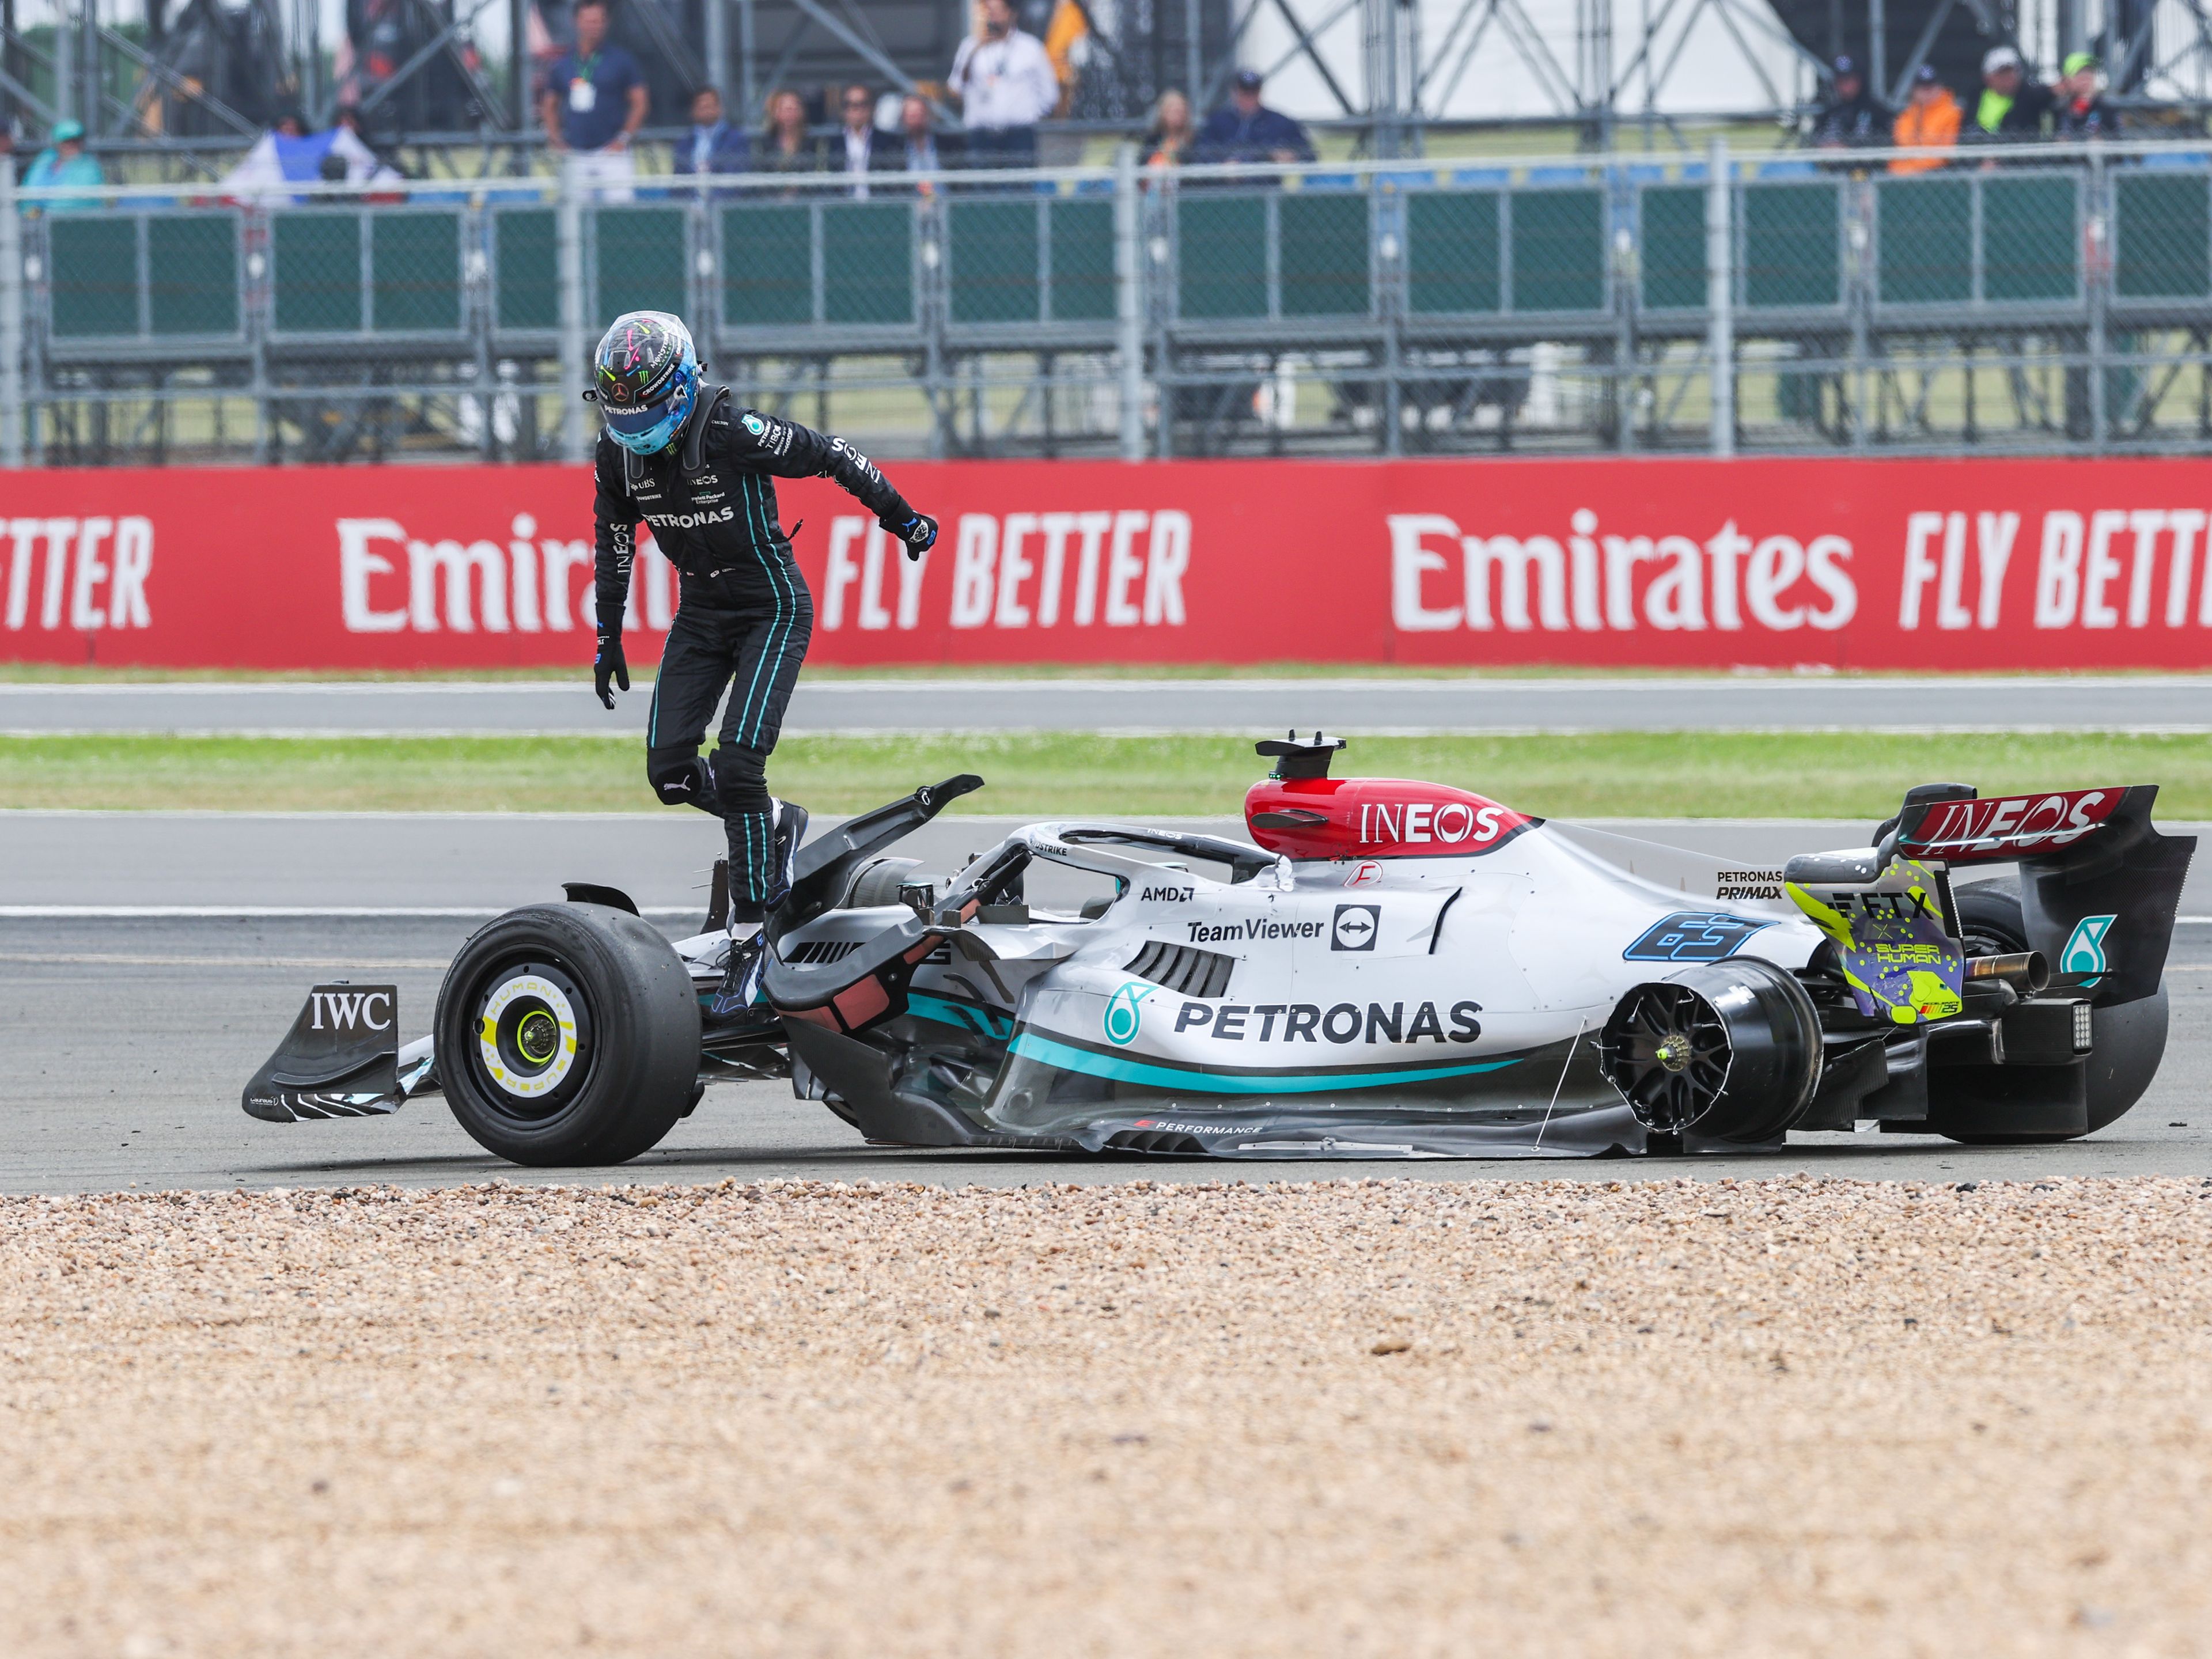 NORTHAMPTON, ENGLAND - JULY 03: George Russell of Mercedes and Great Britain crashes during the F1 Grand Prix of Great Britain at Silverstone on July 03, 2022 in Northampton, England. (Photo by Peter J Fox/Getty Images)